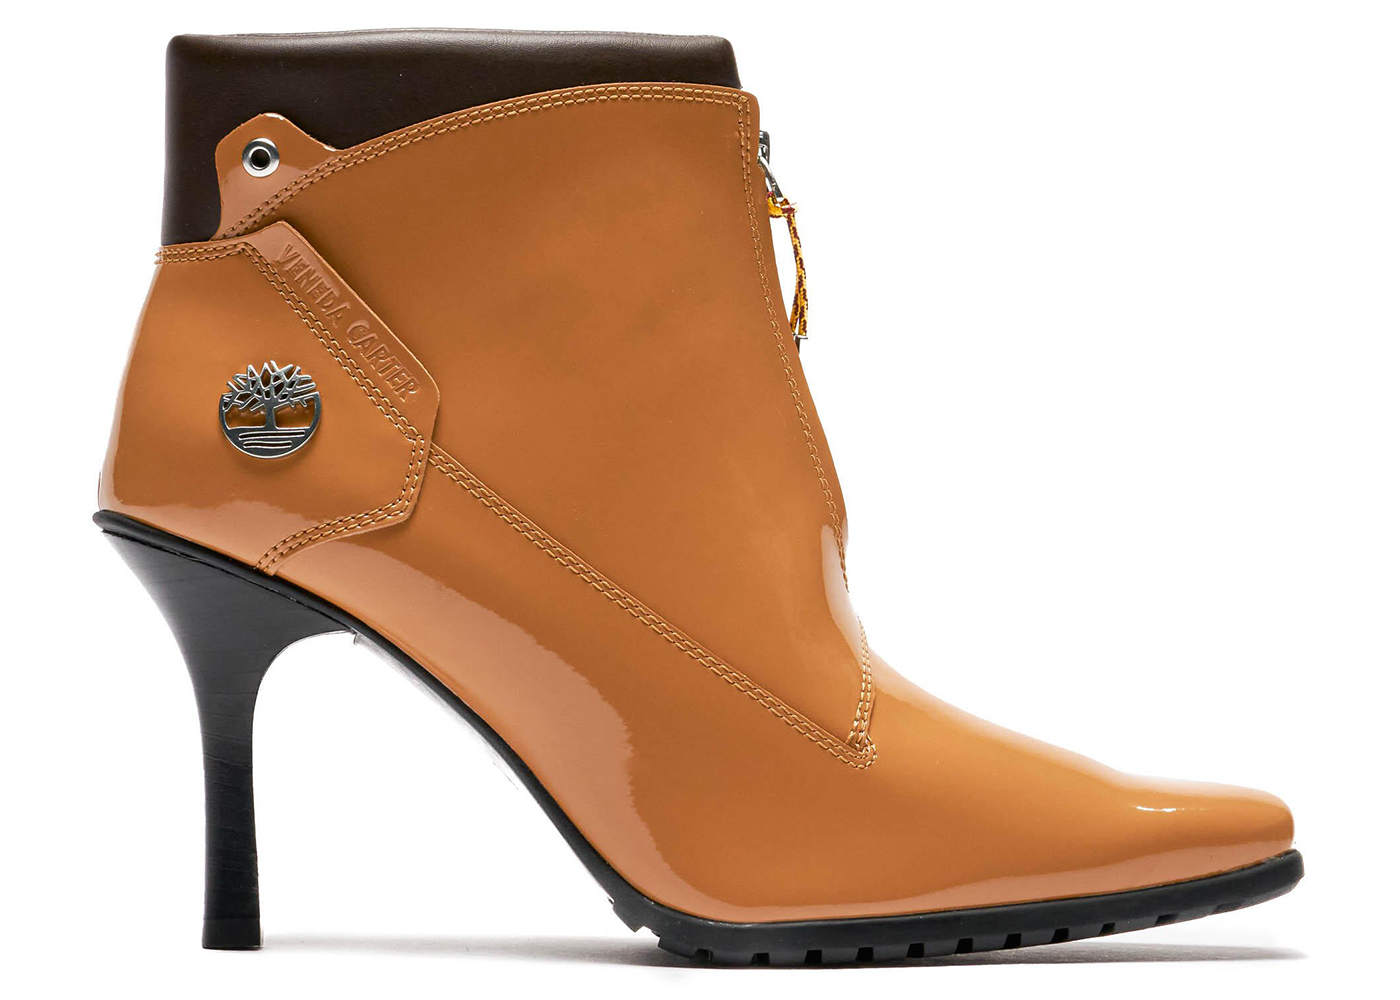 Women's Shoes: Cute Boots, Heels & More | maurices